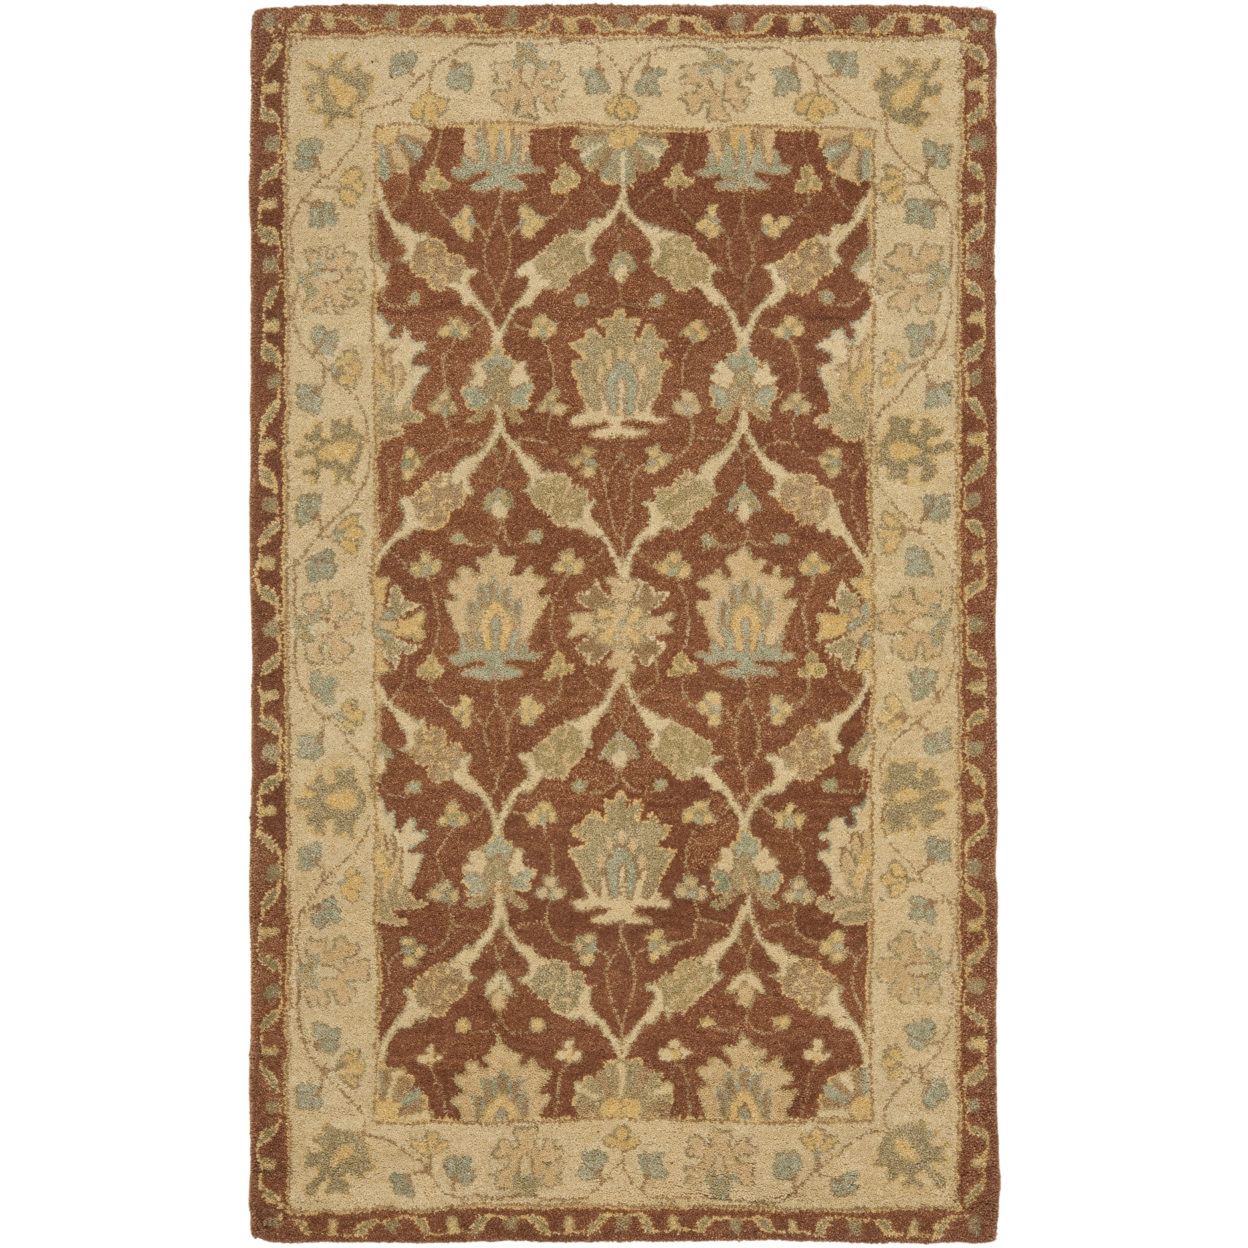 SAFAVIEH Antiquity AT315A Handmade Brown / Taupe Rug - 3' X 5'